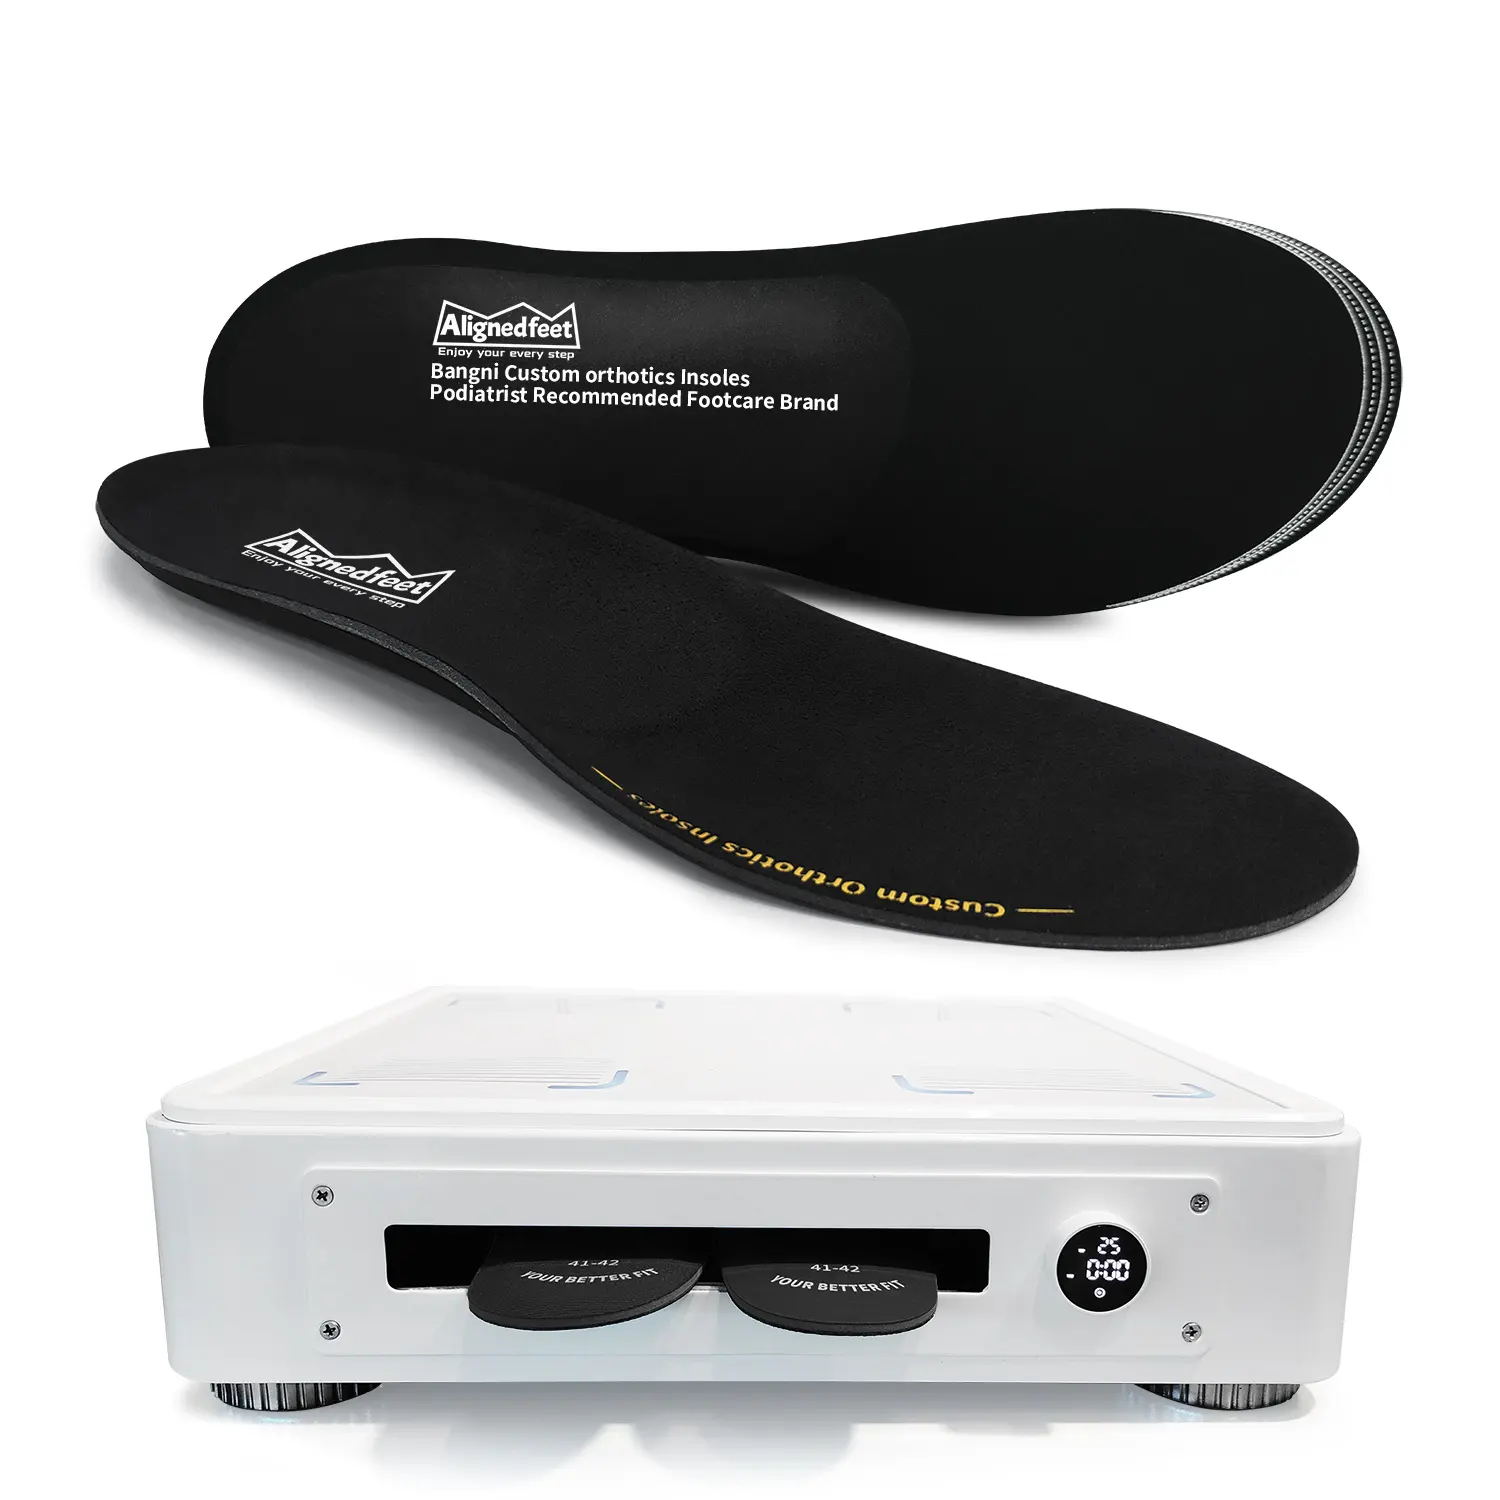 Heat Moldable Arch mendukung Custom Fit Orthotic termoplastik harian dukungan Insole Insole Thermal Molding